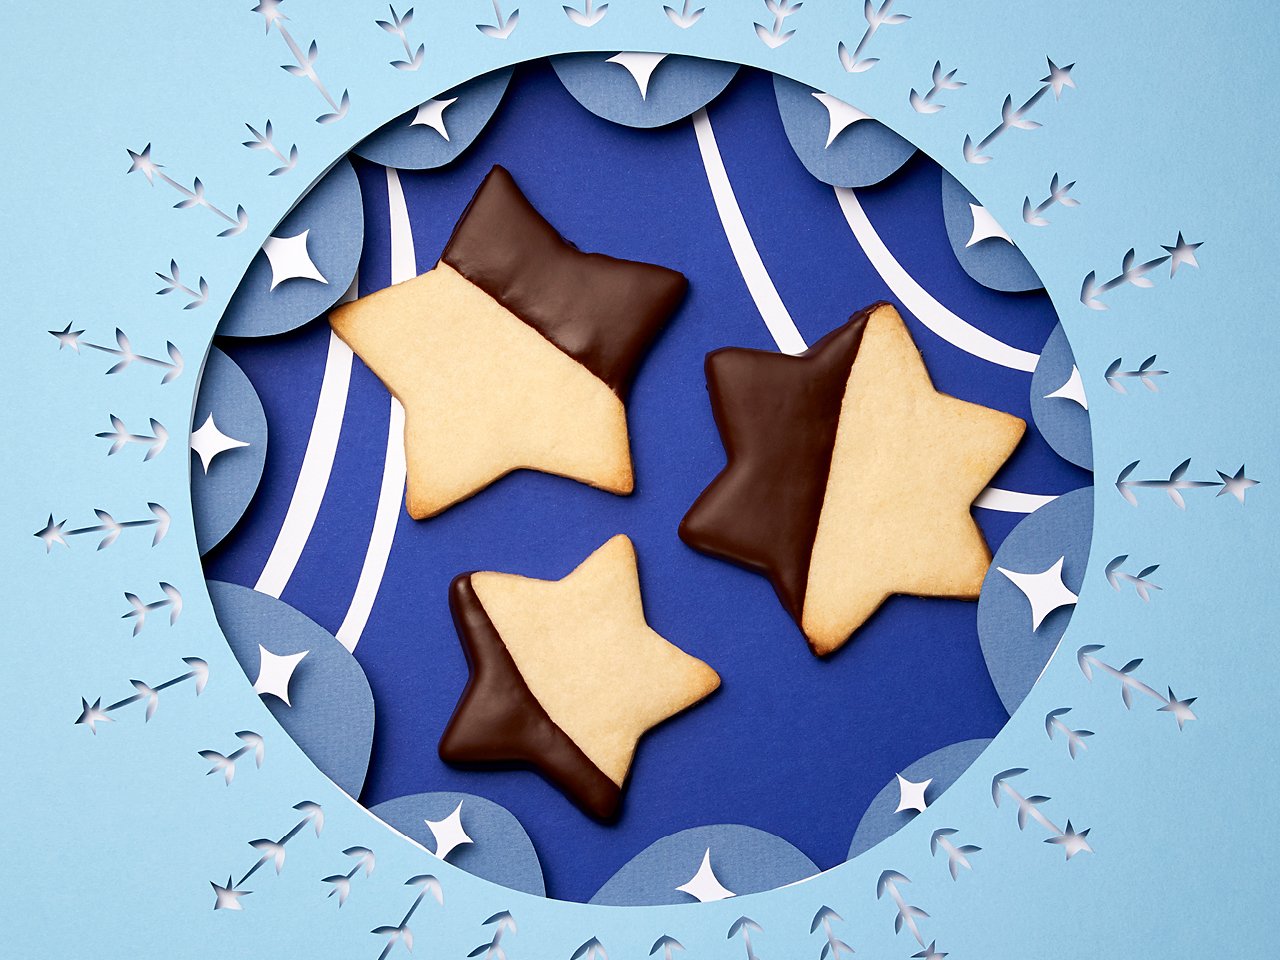 Dutch Bakery & Diner's Chocolate-Dipped Star Cookies